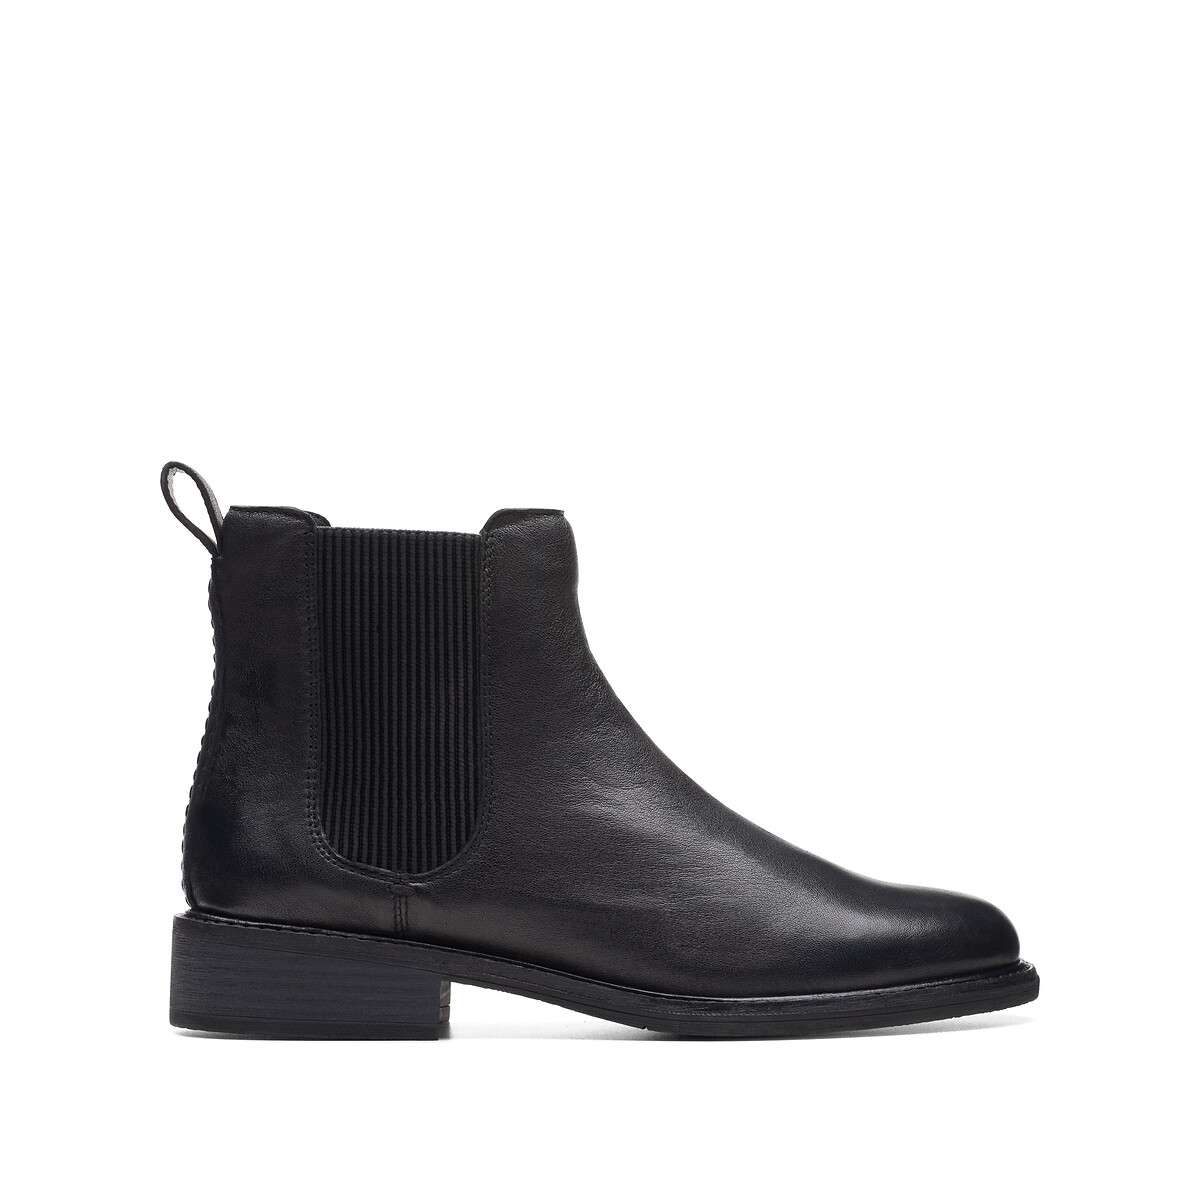 Cologne Arlo Chelsea Boots in Leather